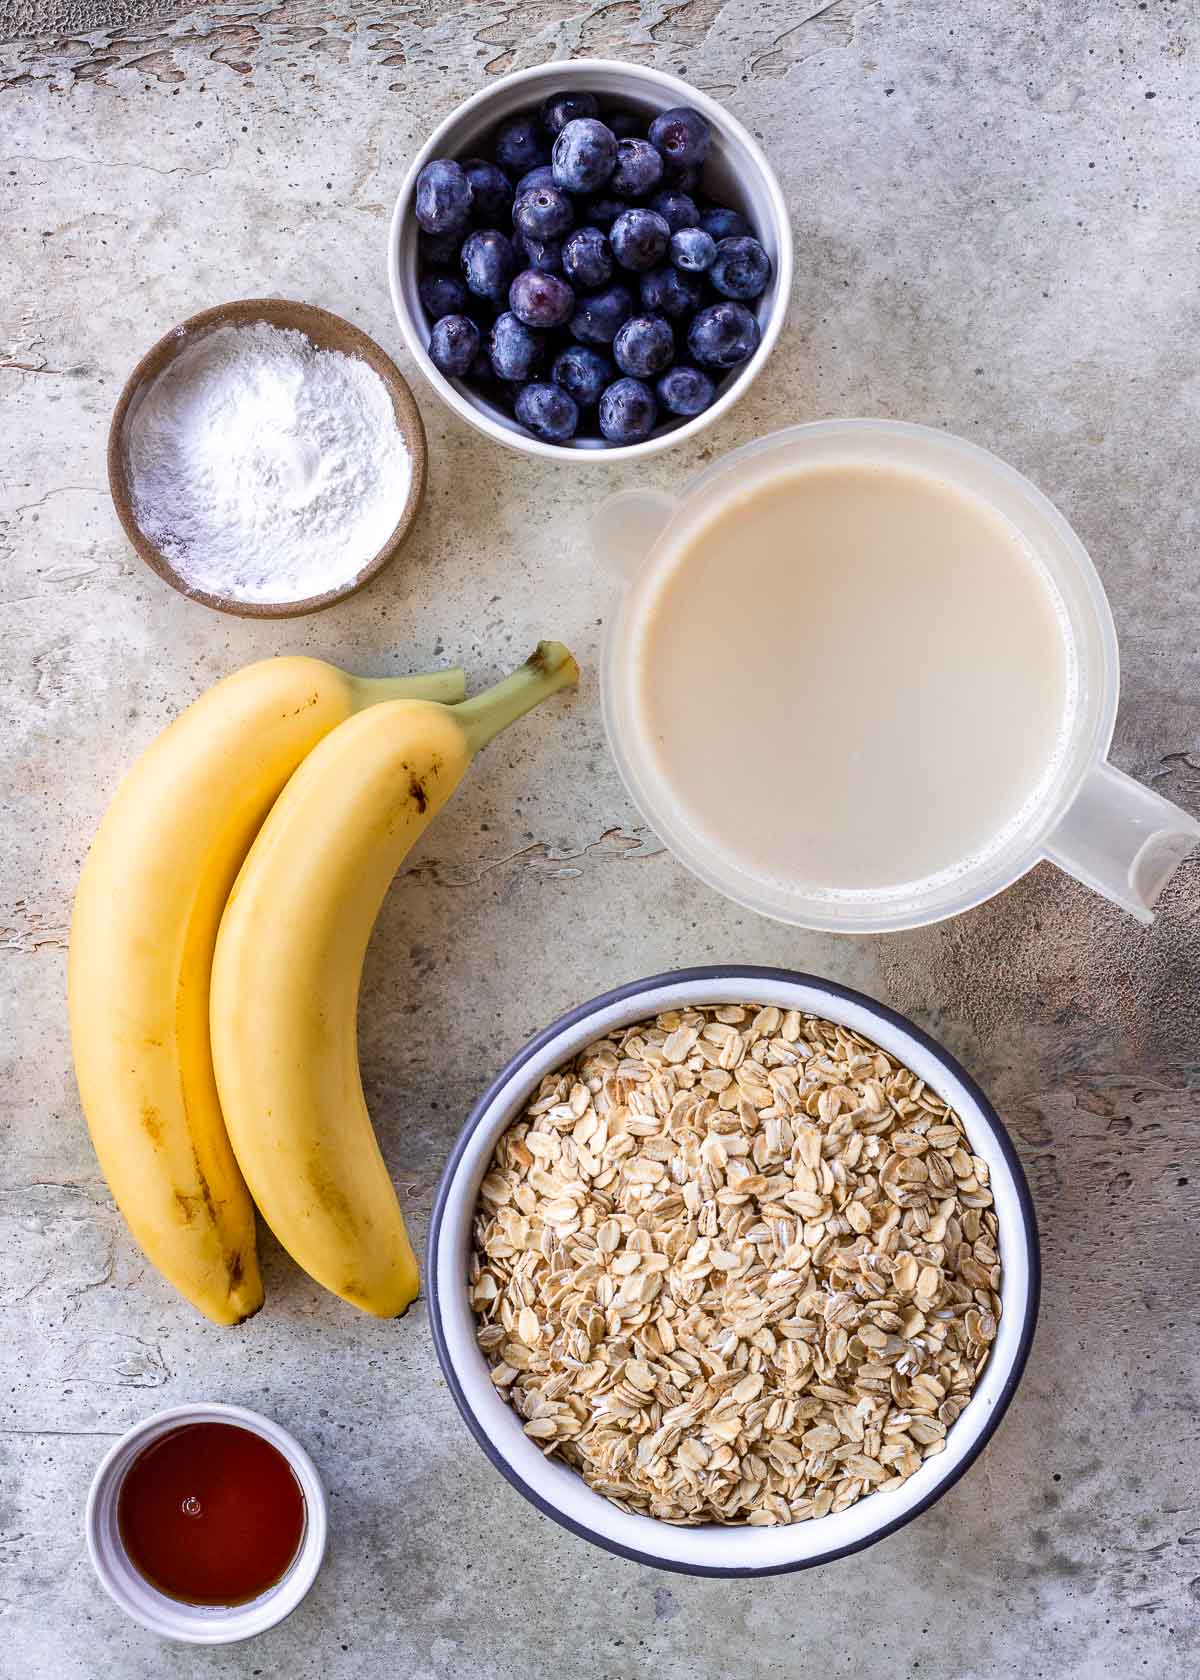 Ingredients for vegan baked oatmeal: banana, oats, dairy-free milk, blueberries, maple syrup and baking powder.